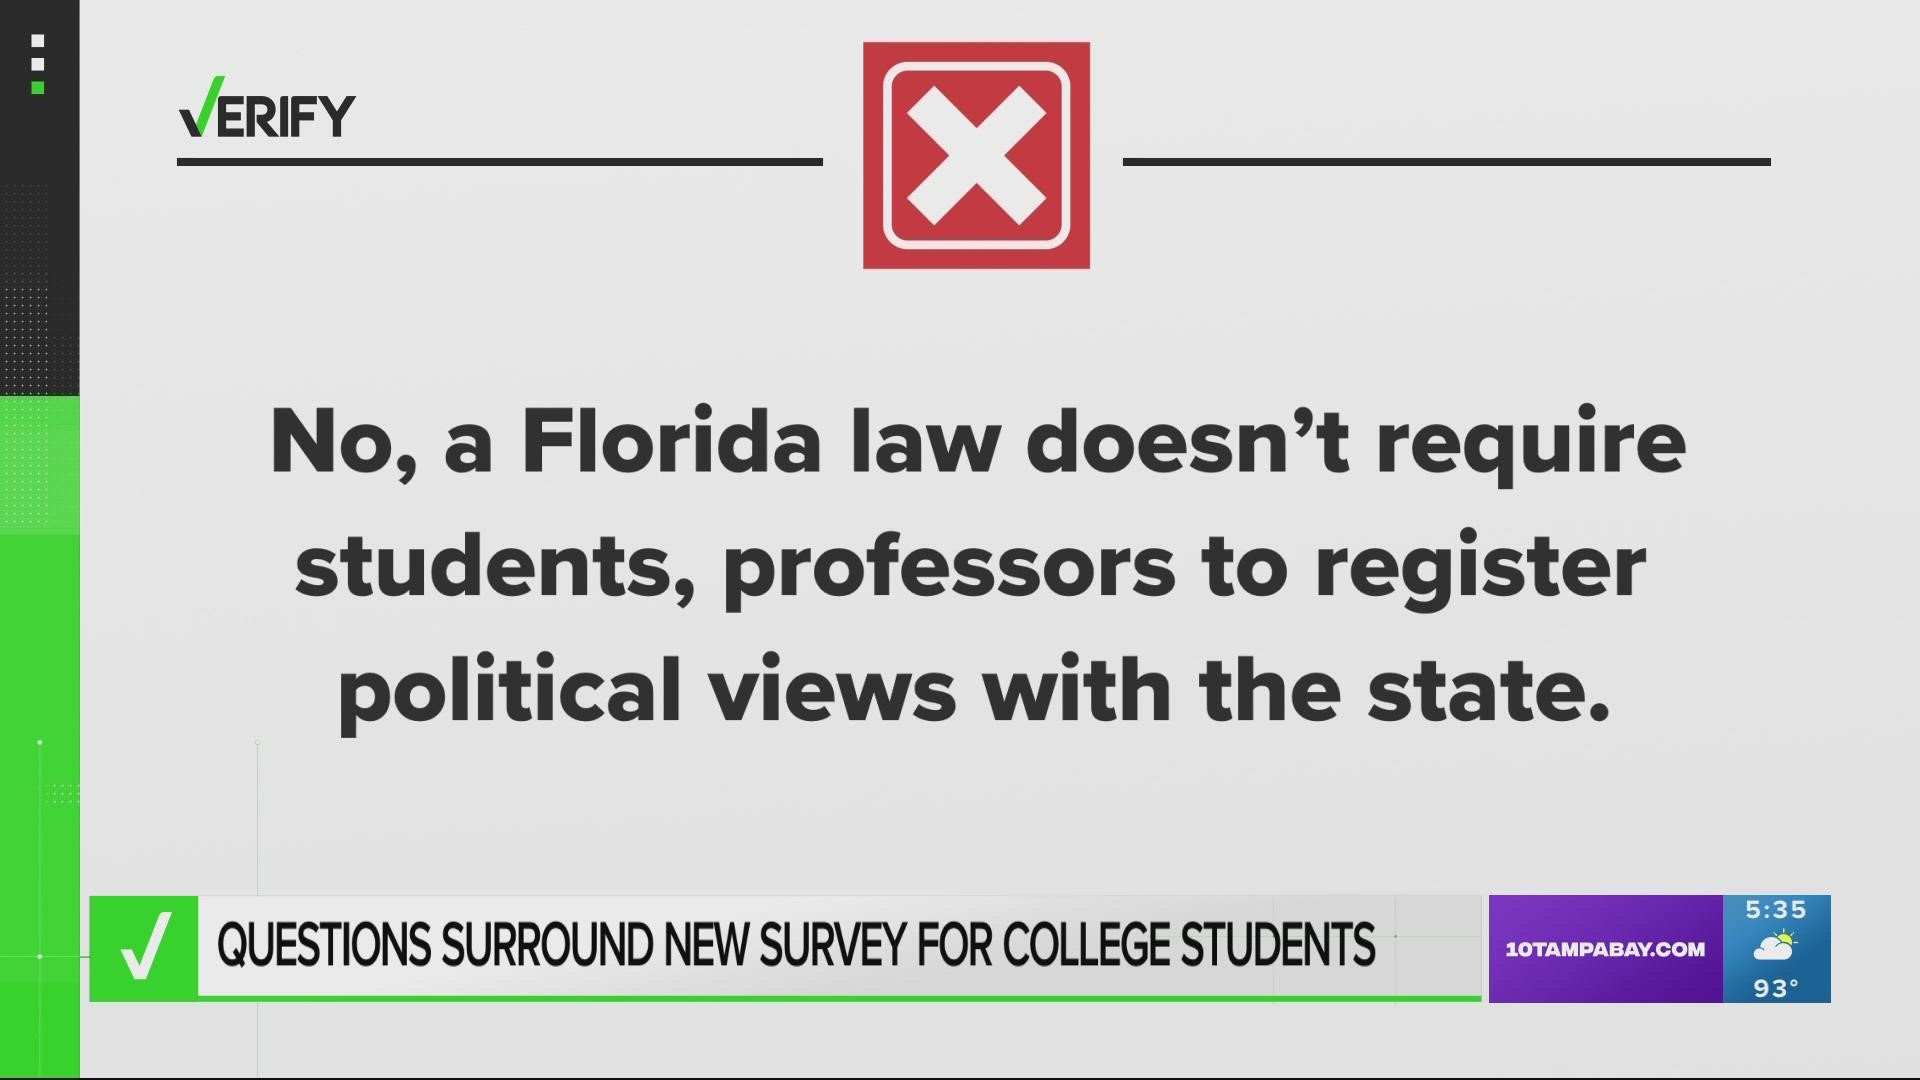 Florida public universities are required to conduct a survey on the “viewpoint diversity” of their students and employees, but individual participation is voluntary.